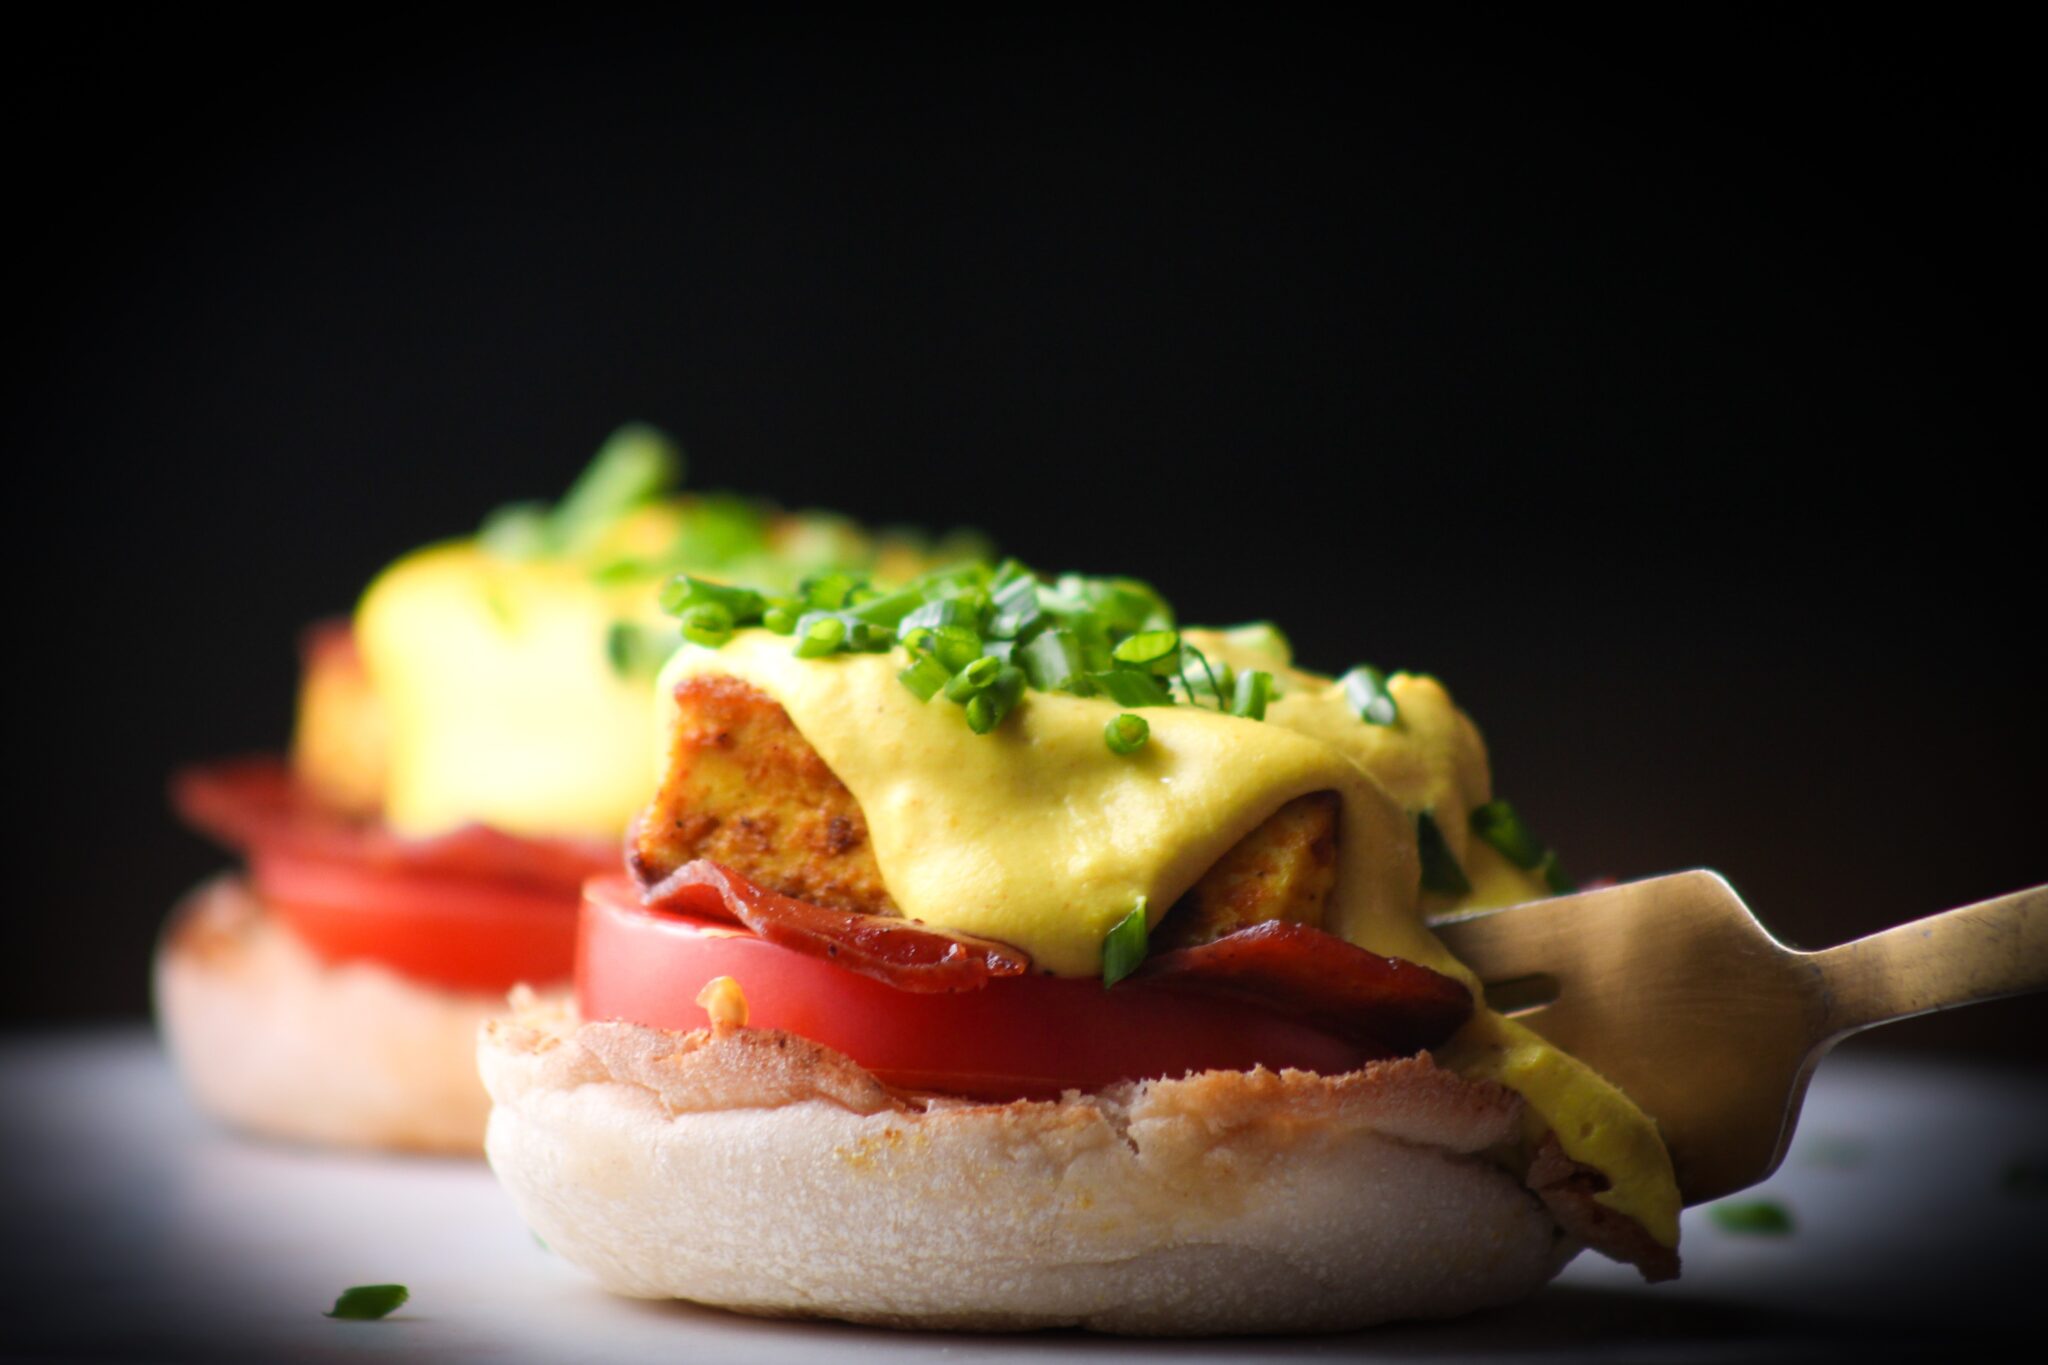 tofu Benedict with chives on top and cashew hollandaise sauce.